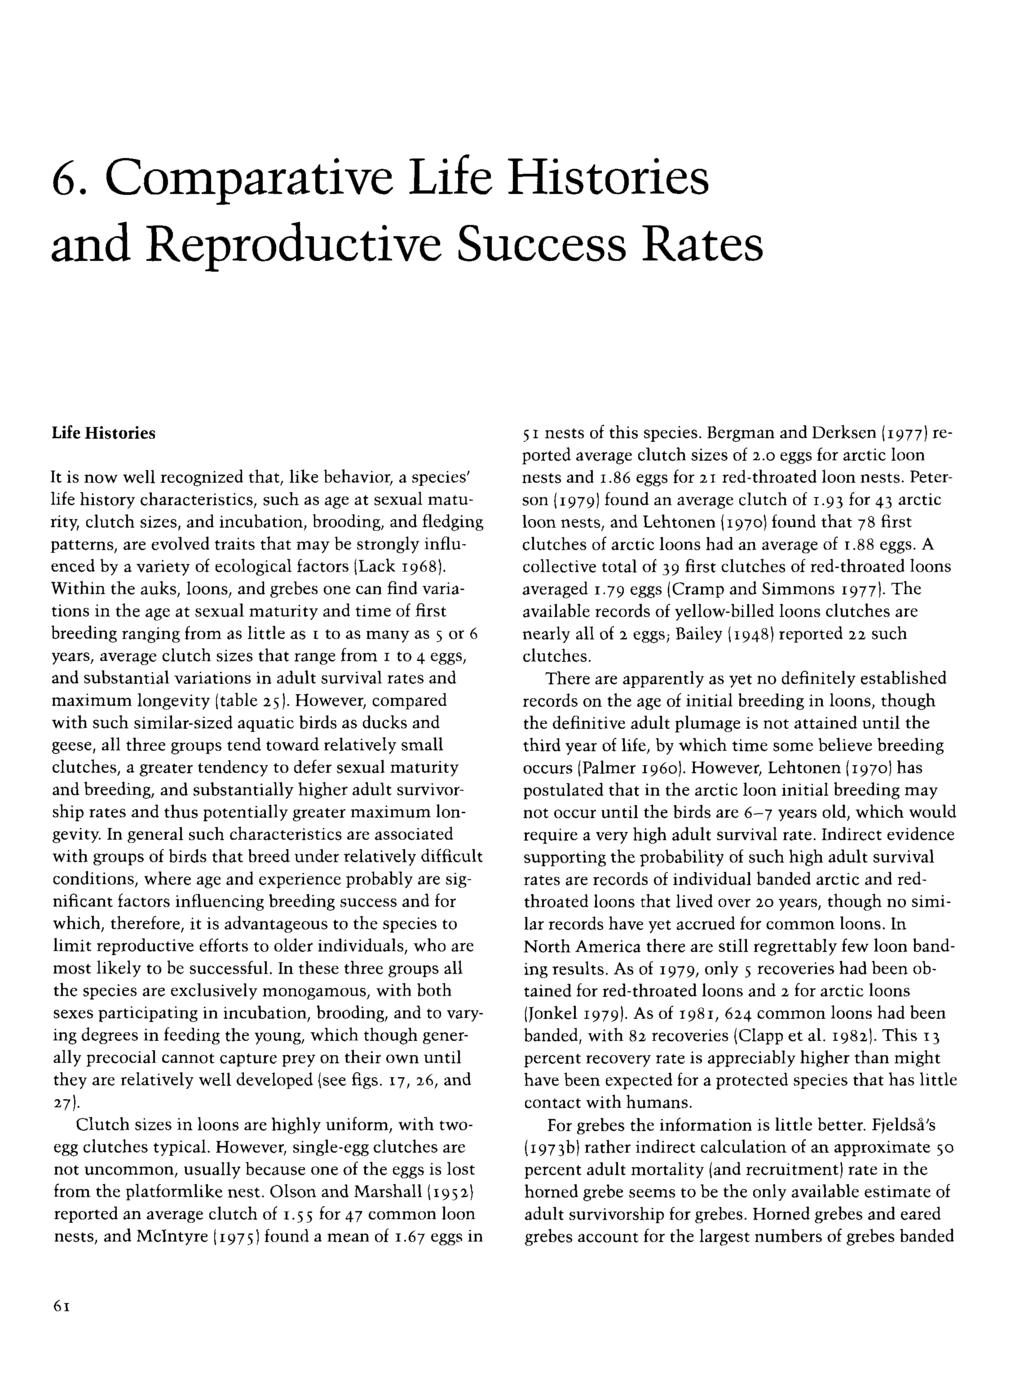 6. Comparative Life Histories and Reproductive Success Rates Life Histories It is now well recognized that, like behavior, a species' life history characteristics, such as age at sexual maturity,